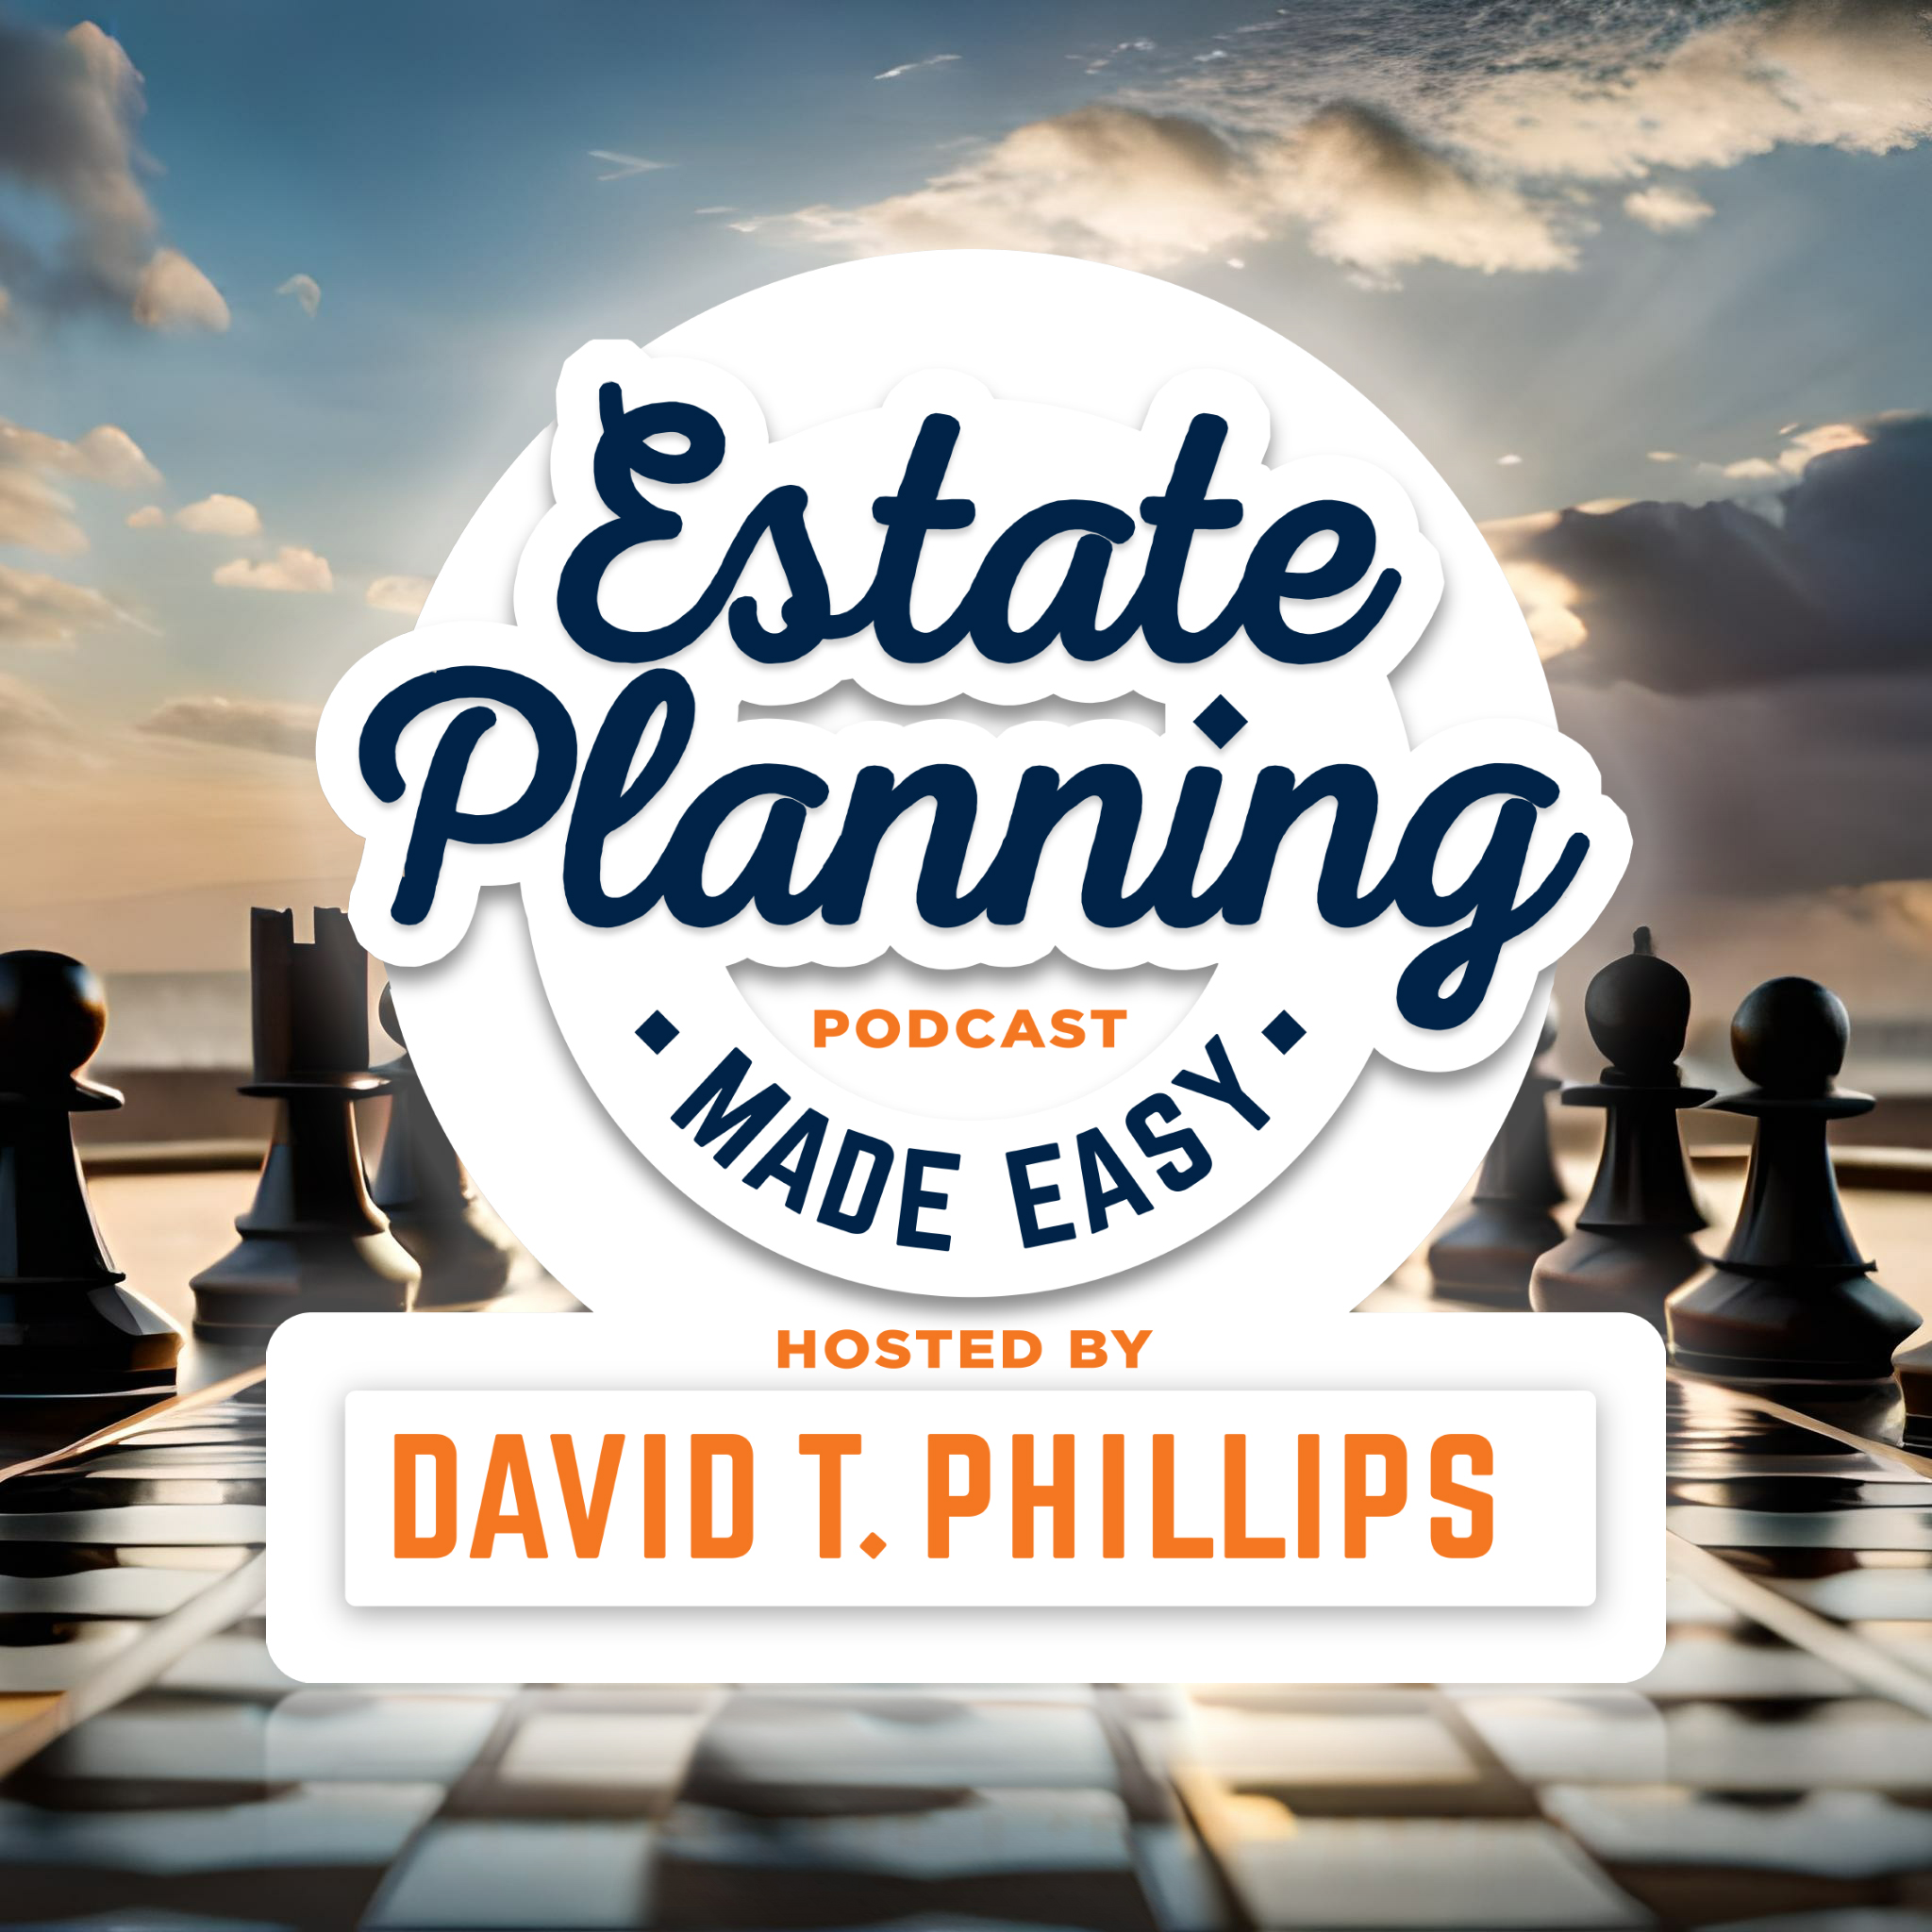 Estate Planning Mistake #4: Paying too much income and capital gains taxes